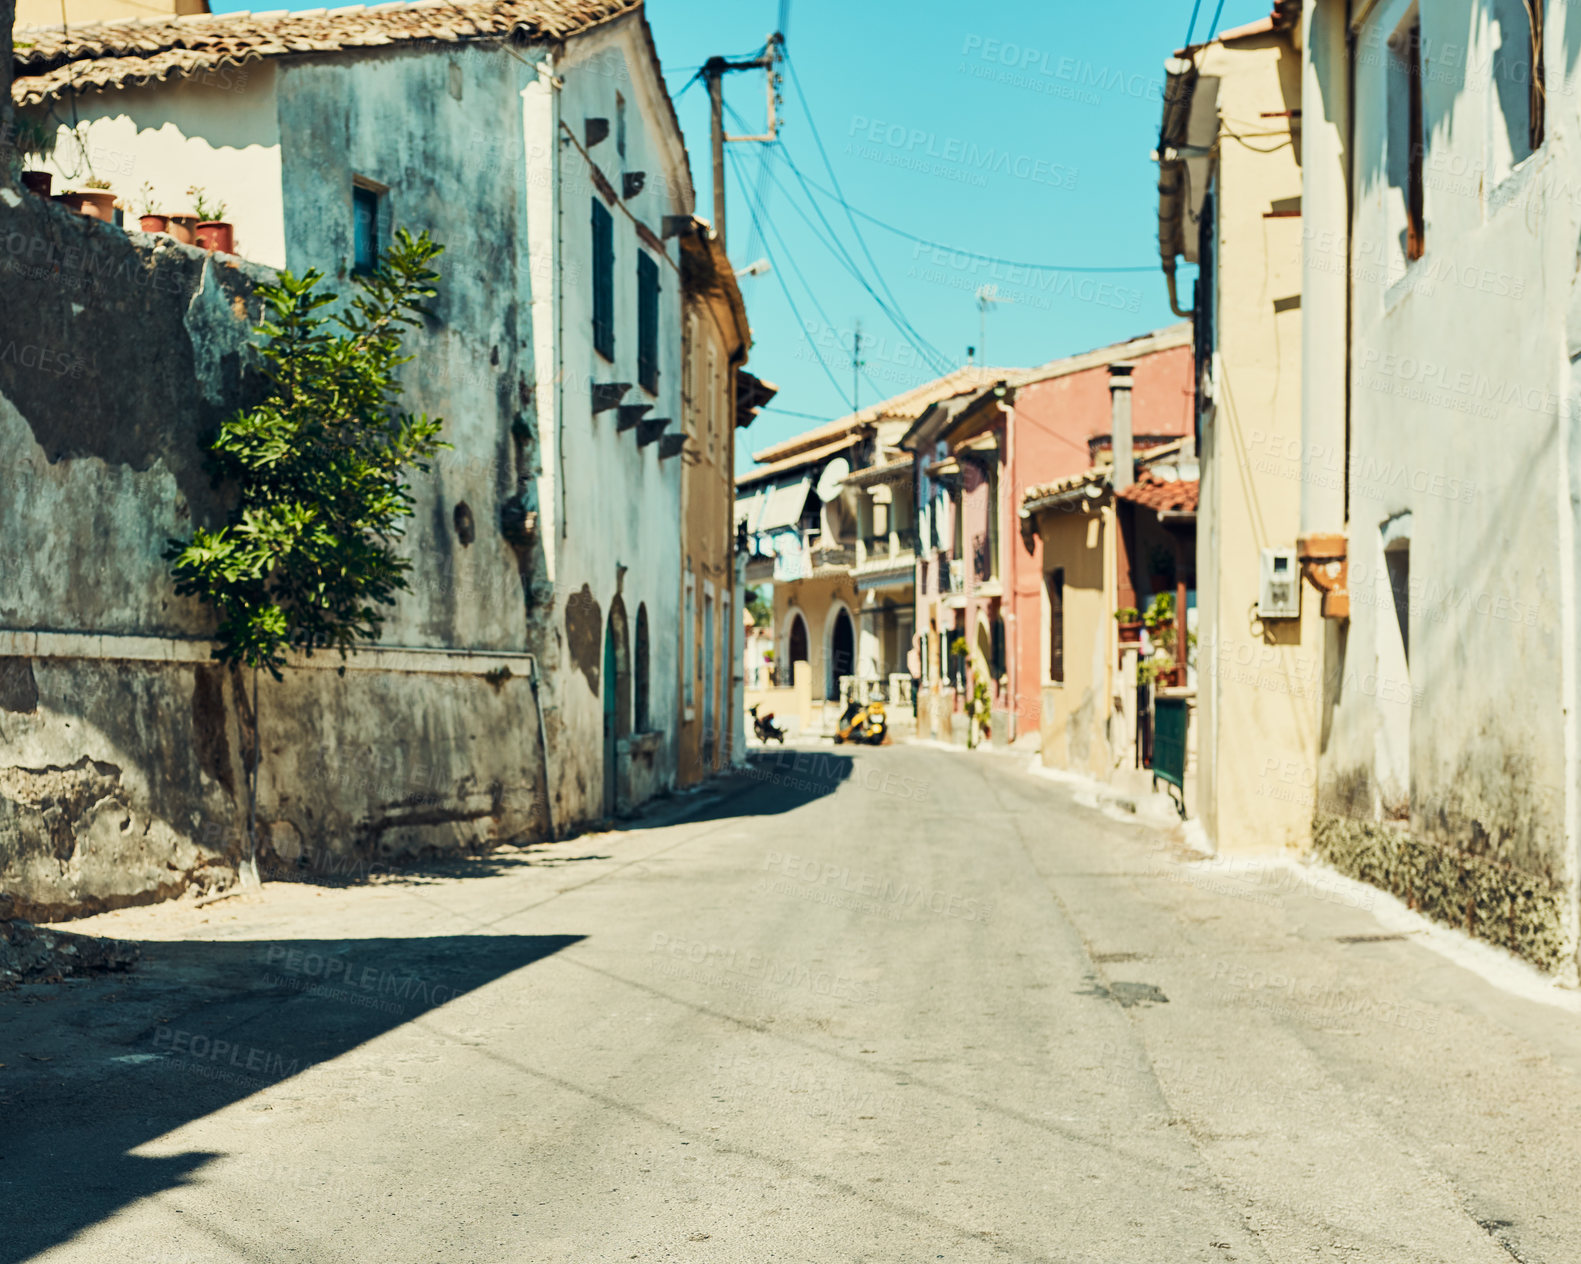 Buy stock photo Shot of a street in an ancient, foreign city